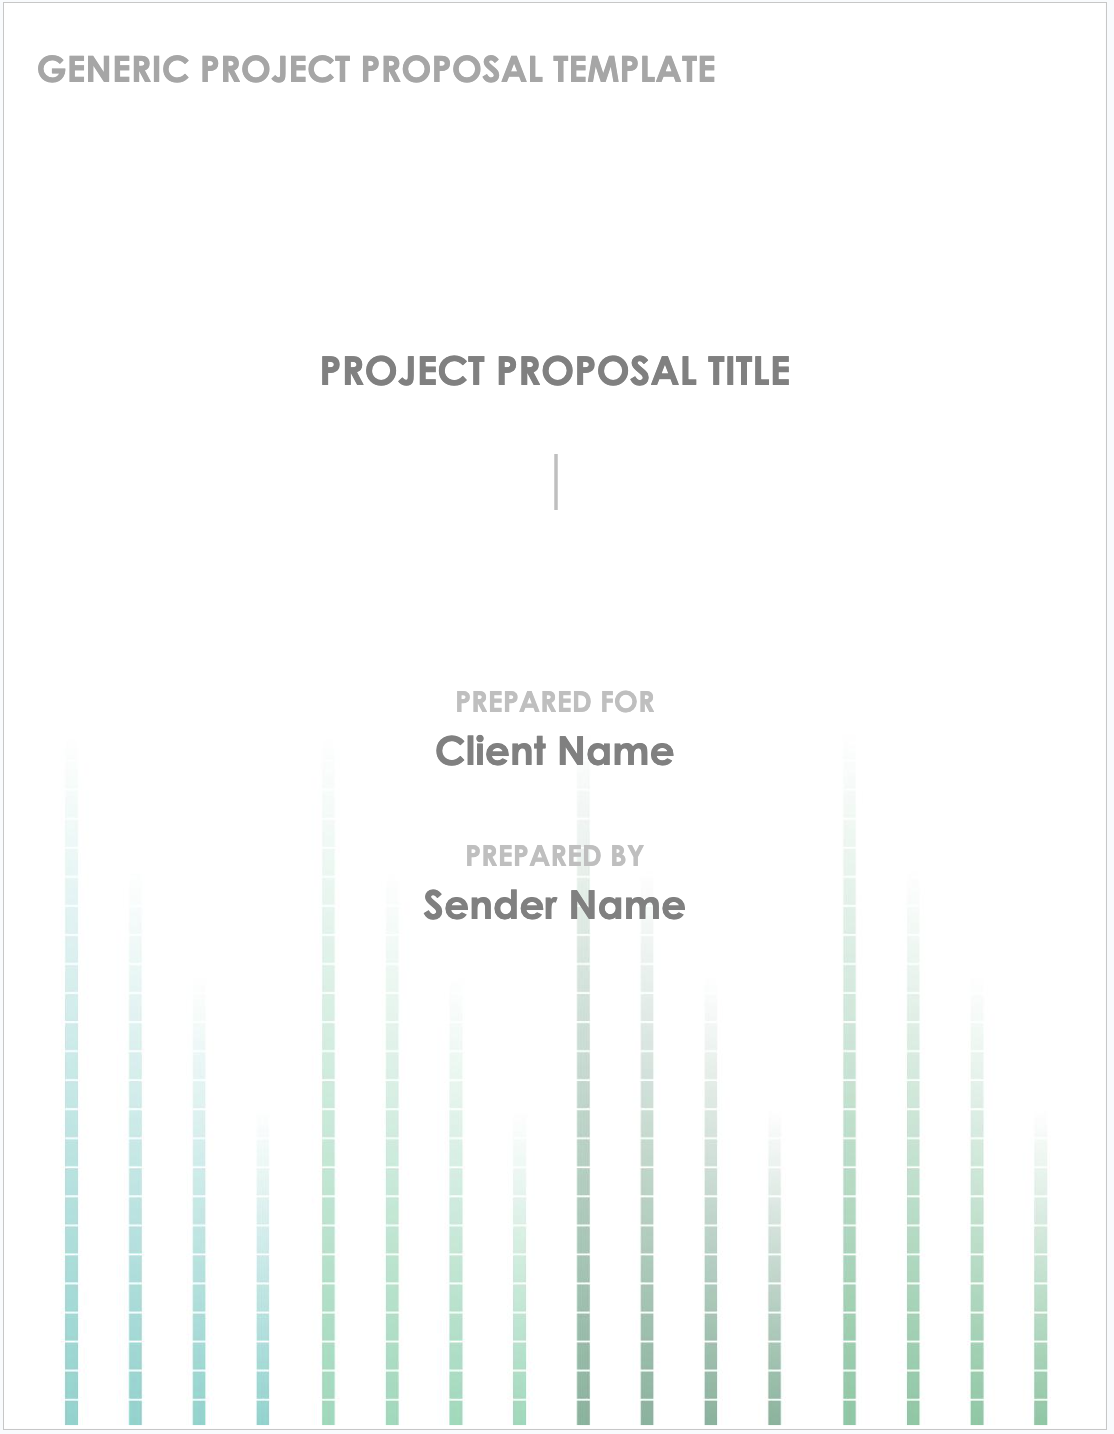 Image of proposal template by Smartsheet